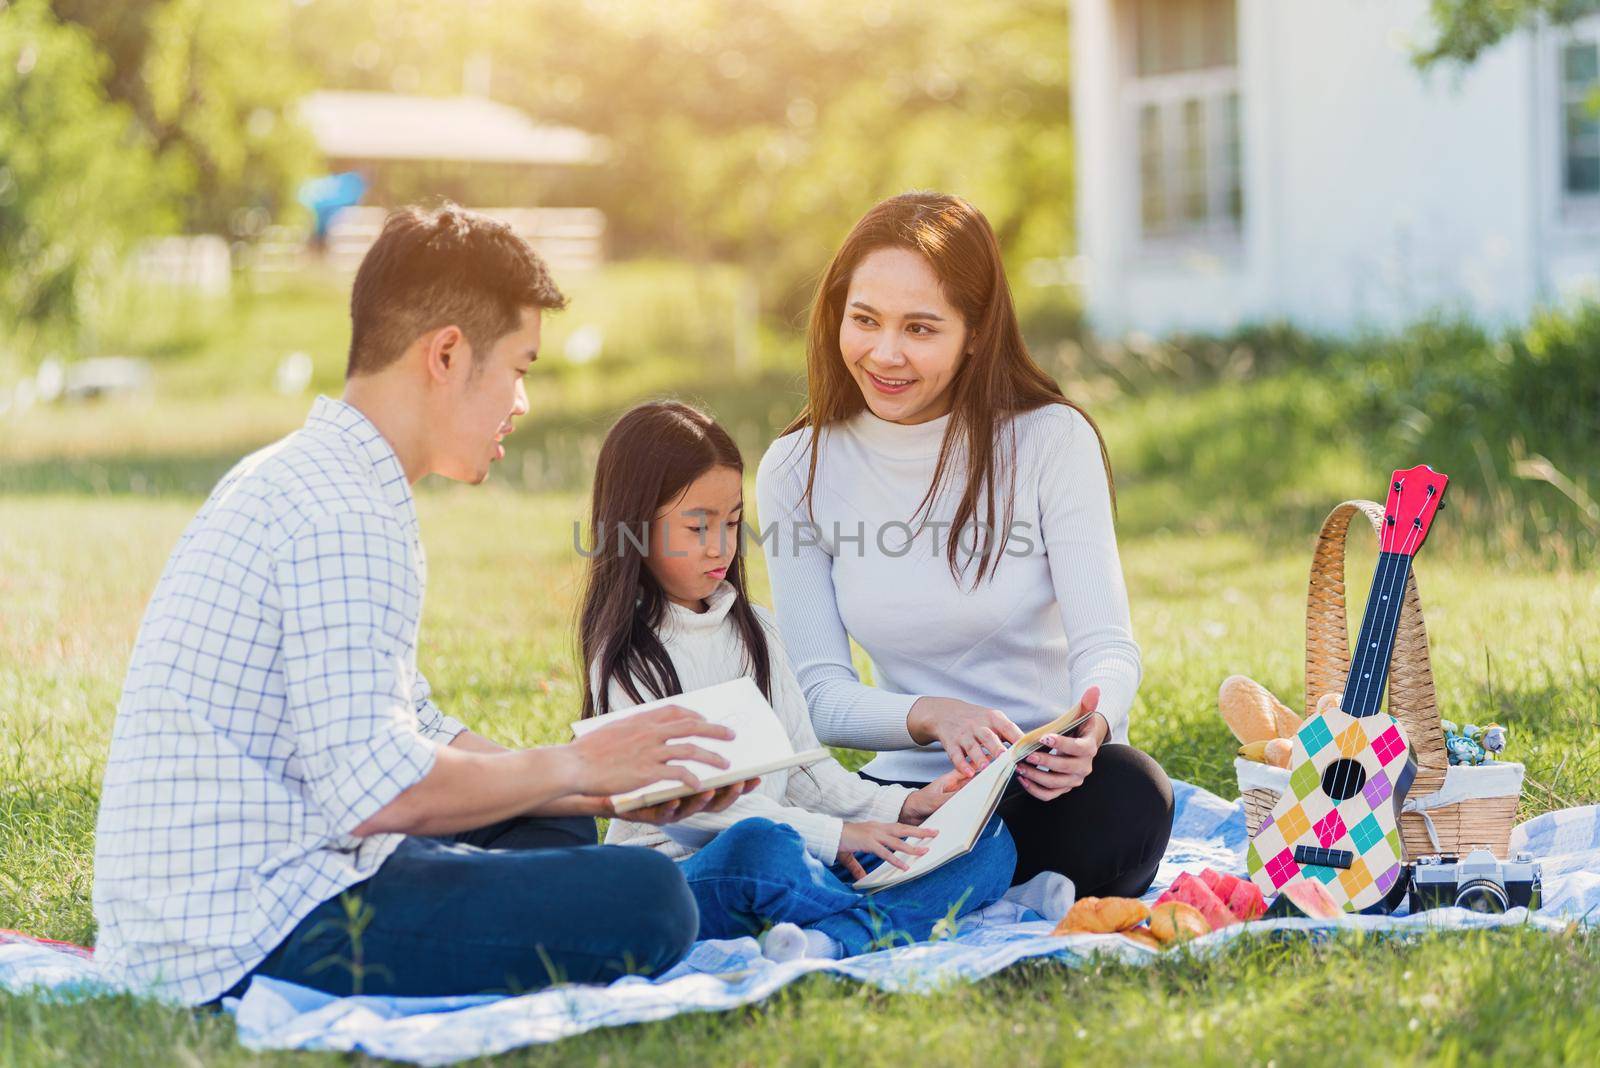 Asian family having fun and enjoying outdoor on picnic blanket reading book in park by Sorapop